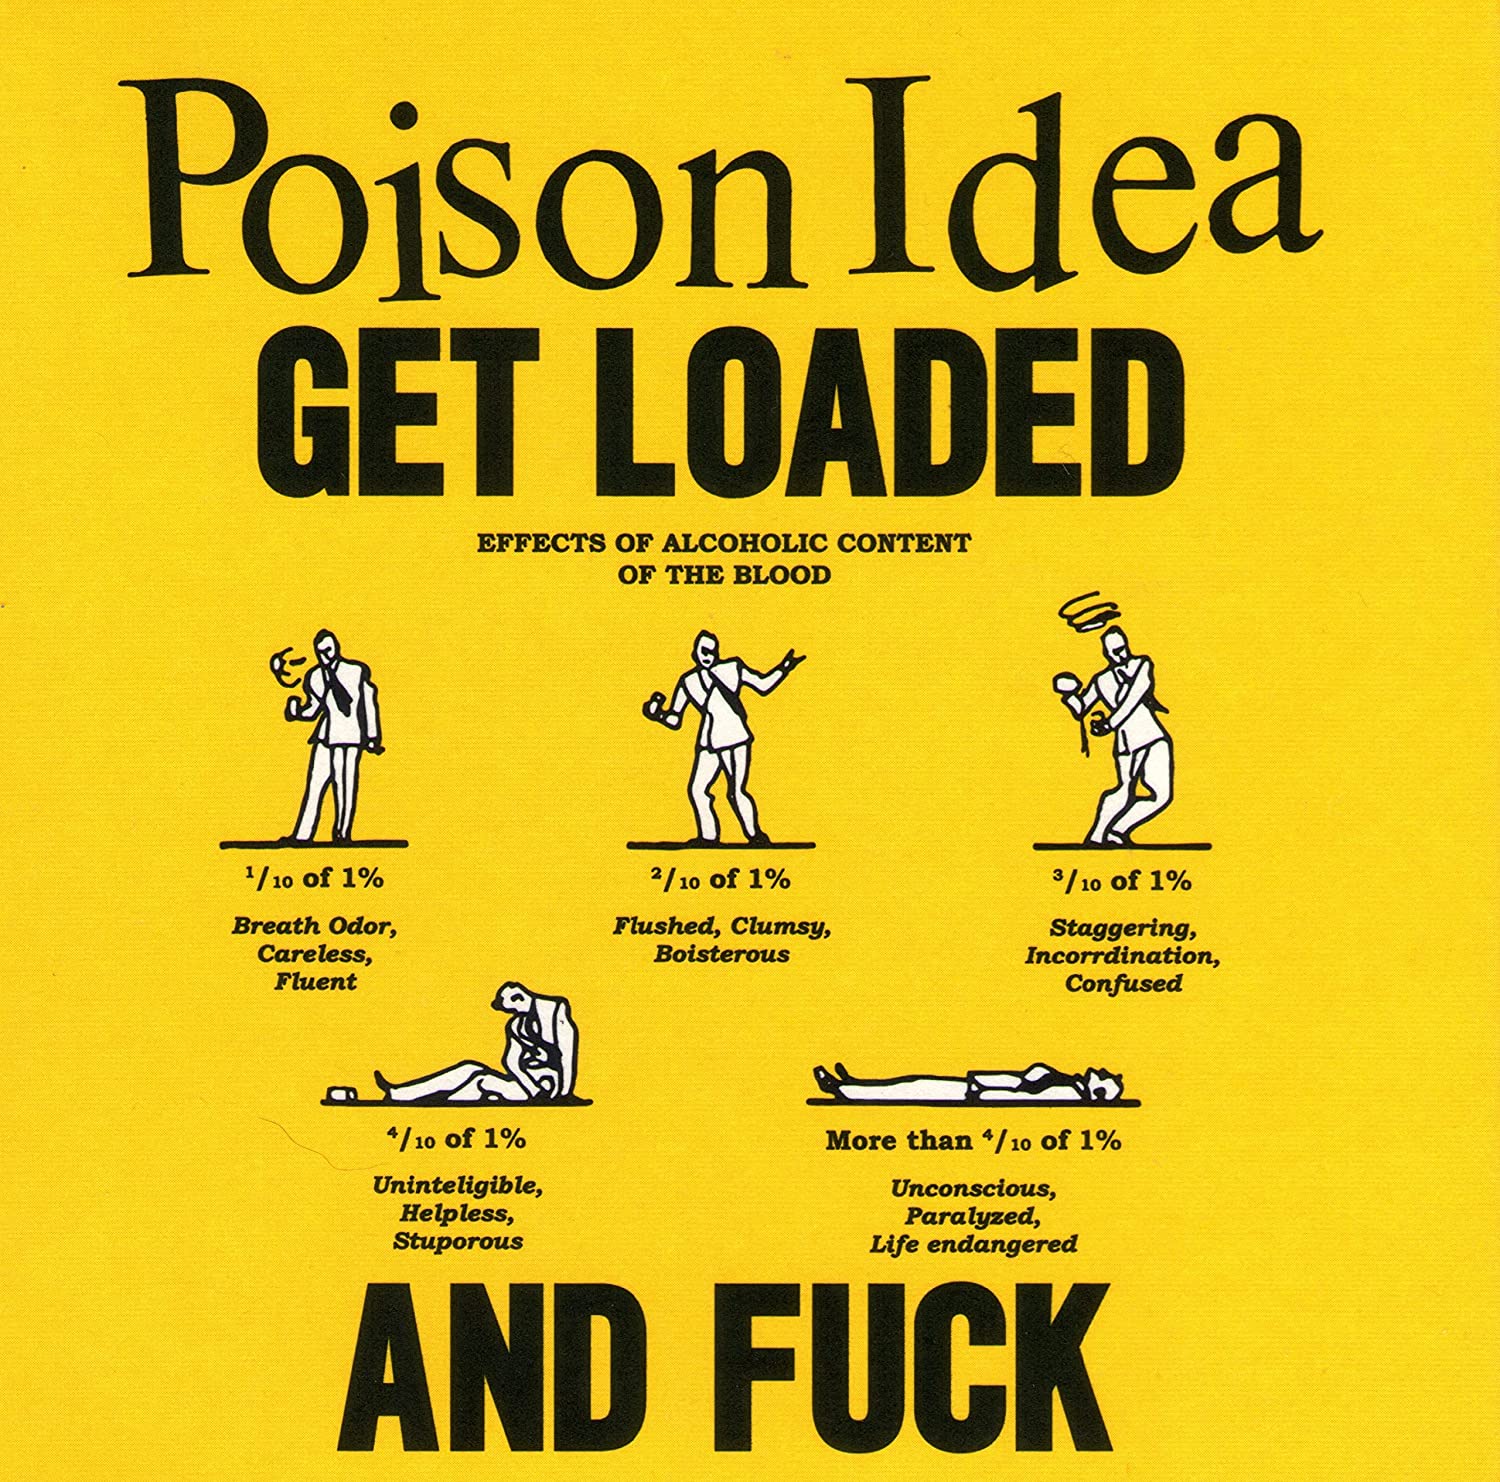 Poison Idea - Get Loaded And Fuck LP